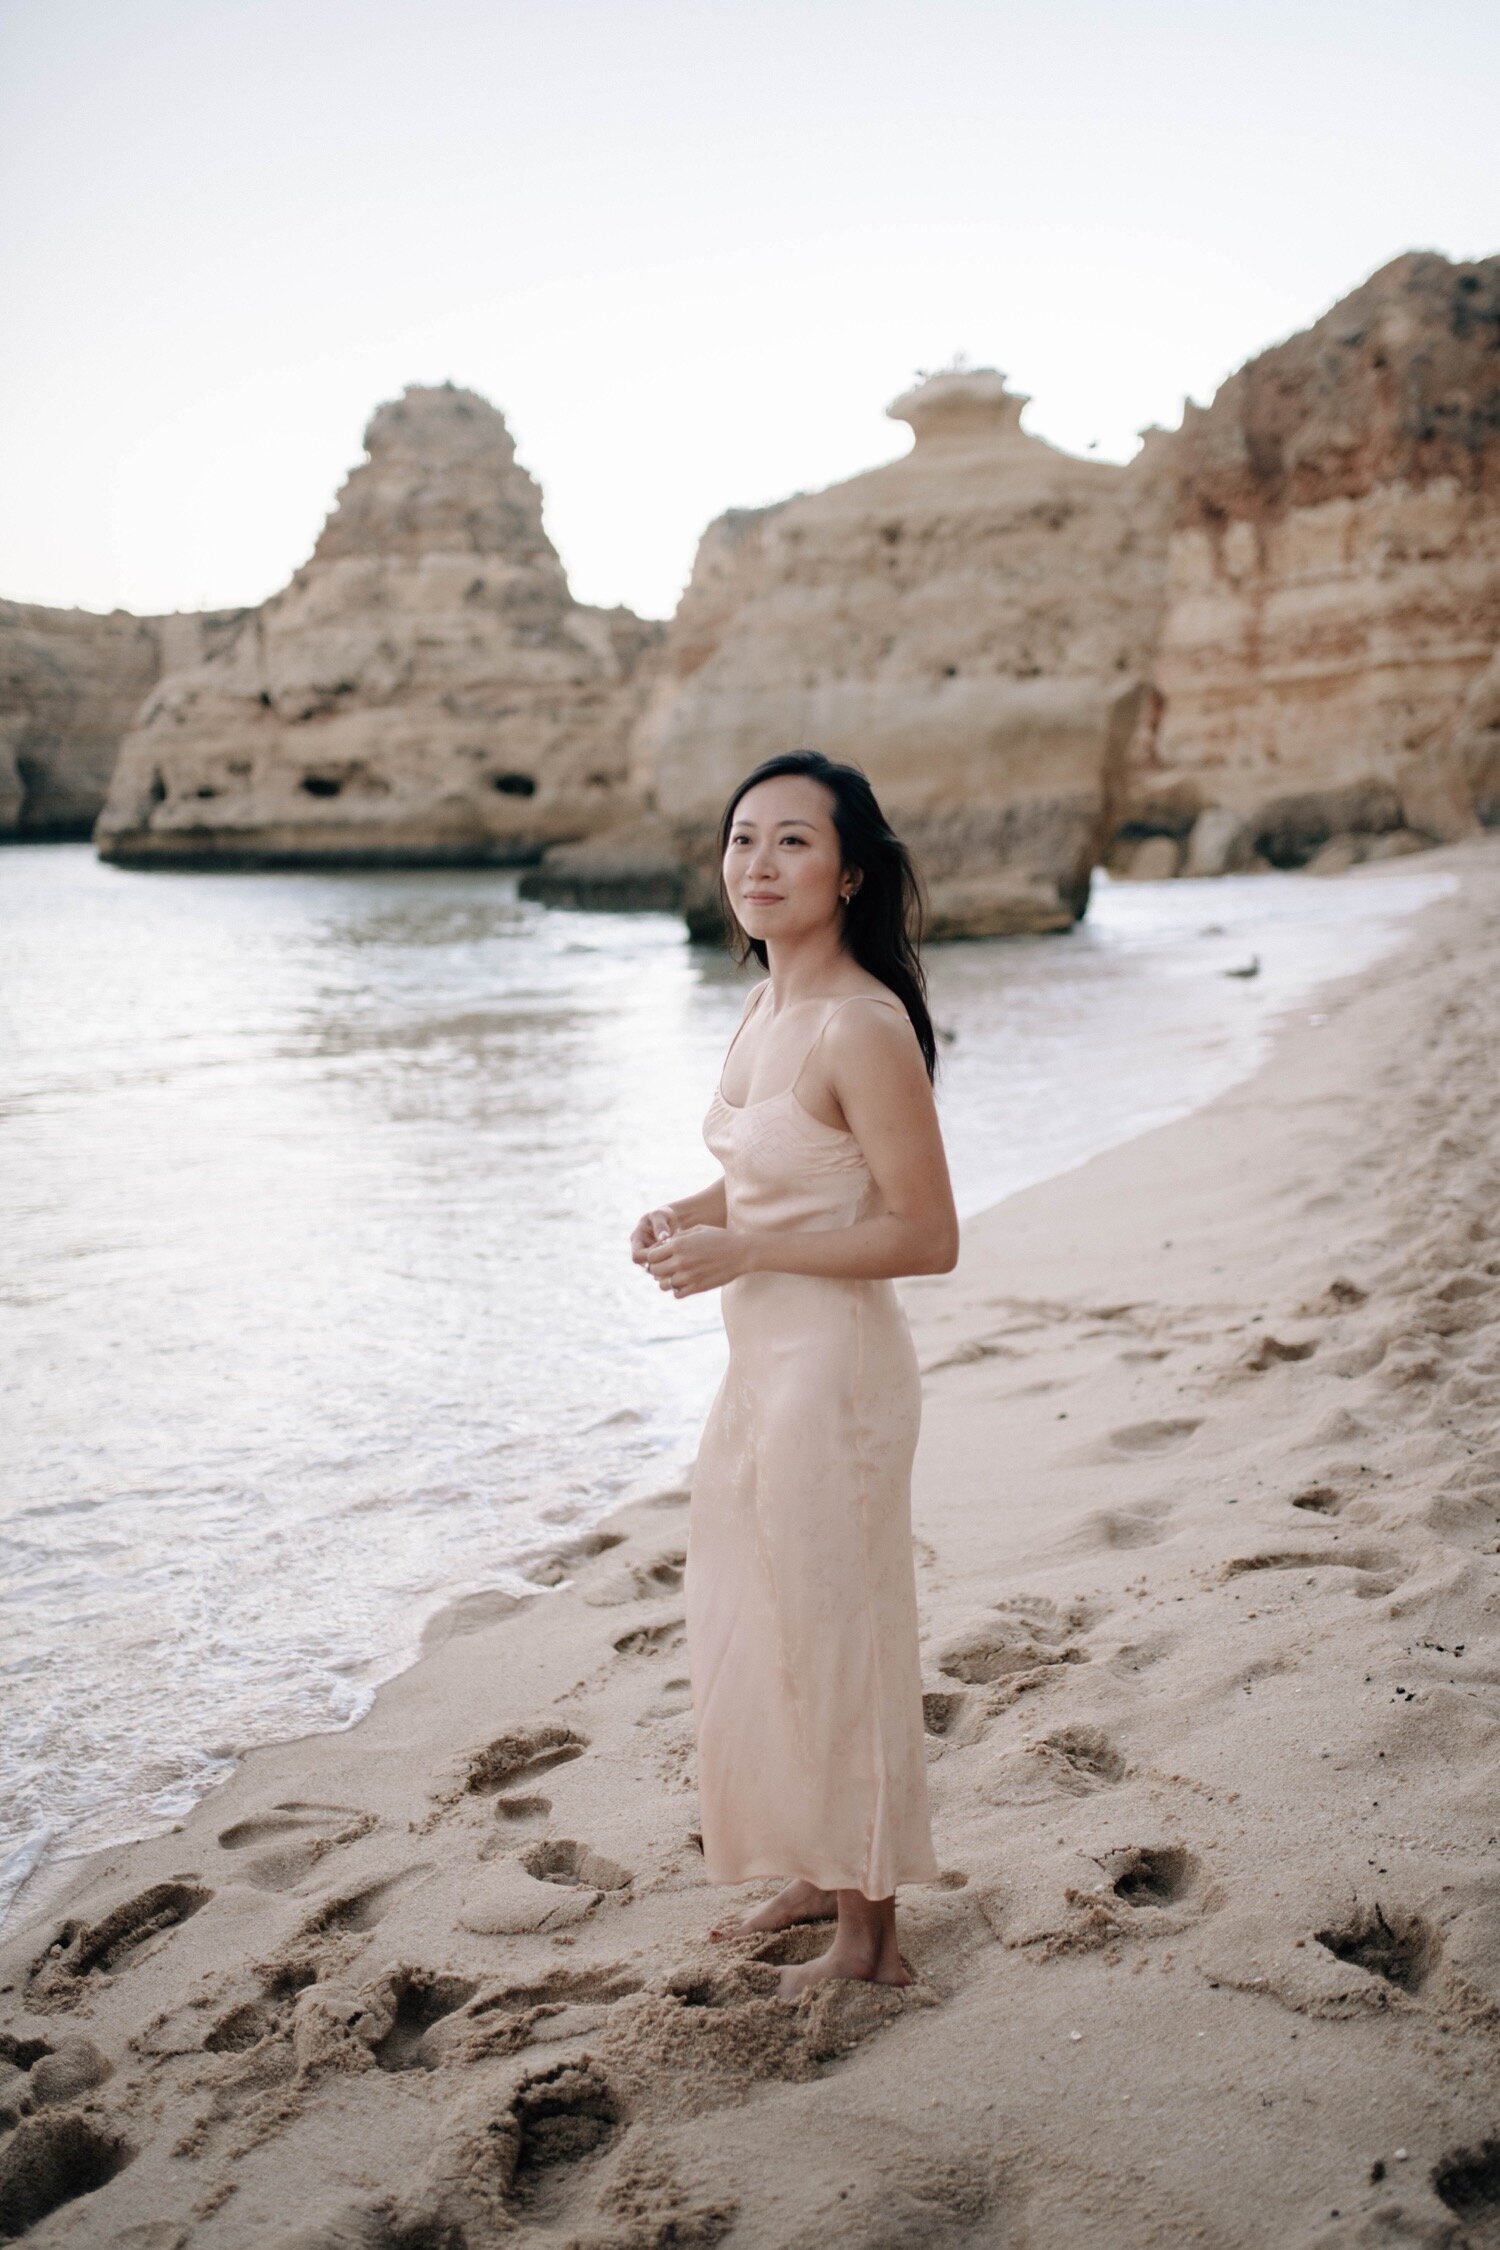 20_Flora_And_Grace_Portugal_Editorial_Wedding_Photographer Lisboa_Wedding_Photographer-146_Natural editorial wedding photographer at the Algarve coast in Portugal. Discover the wedding photography of Flora and Grace.